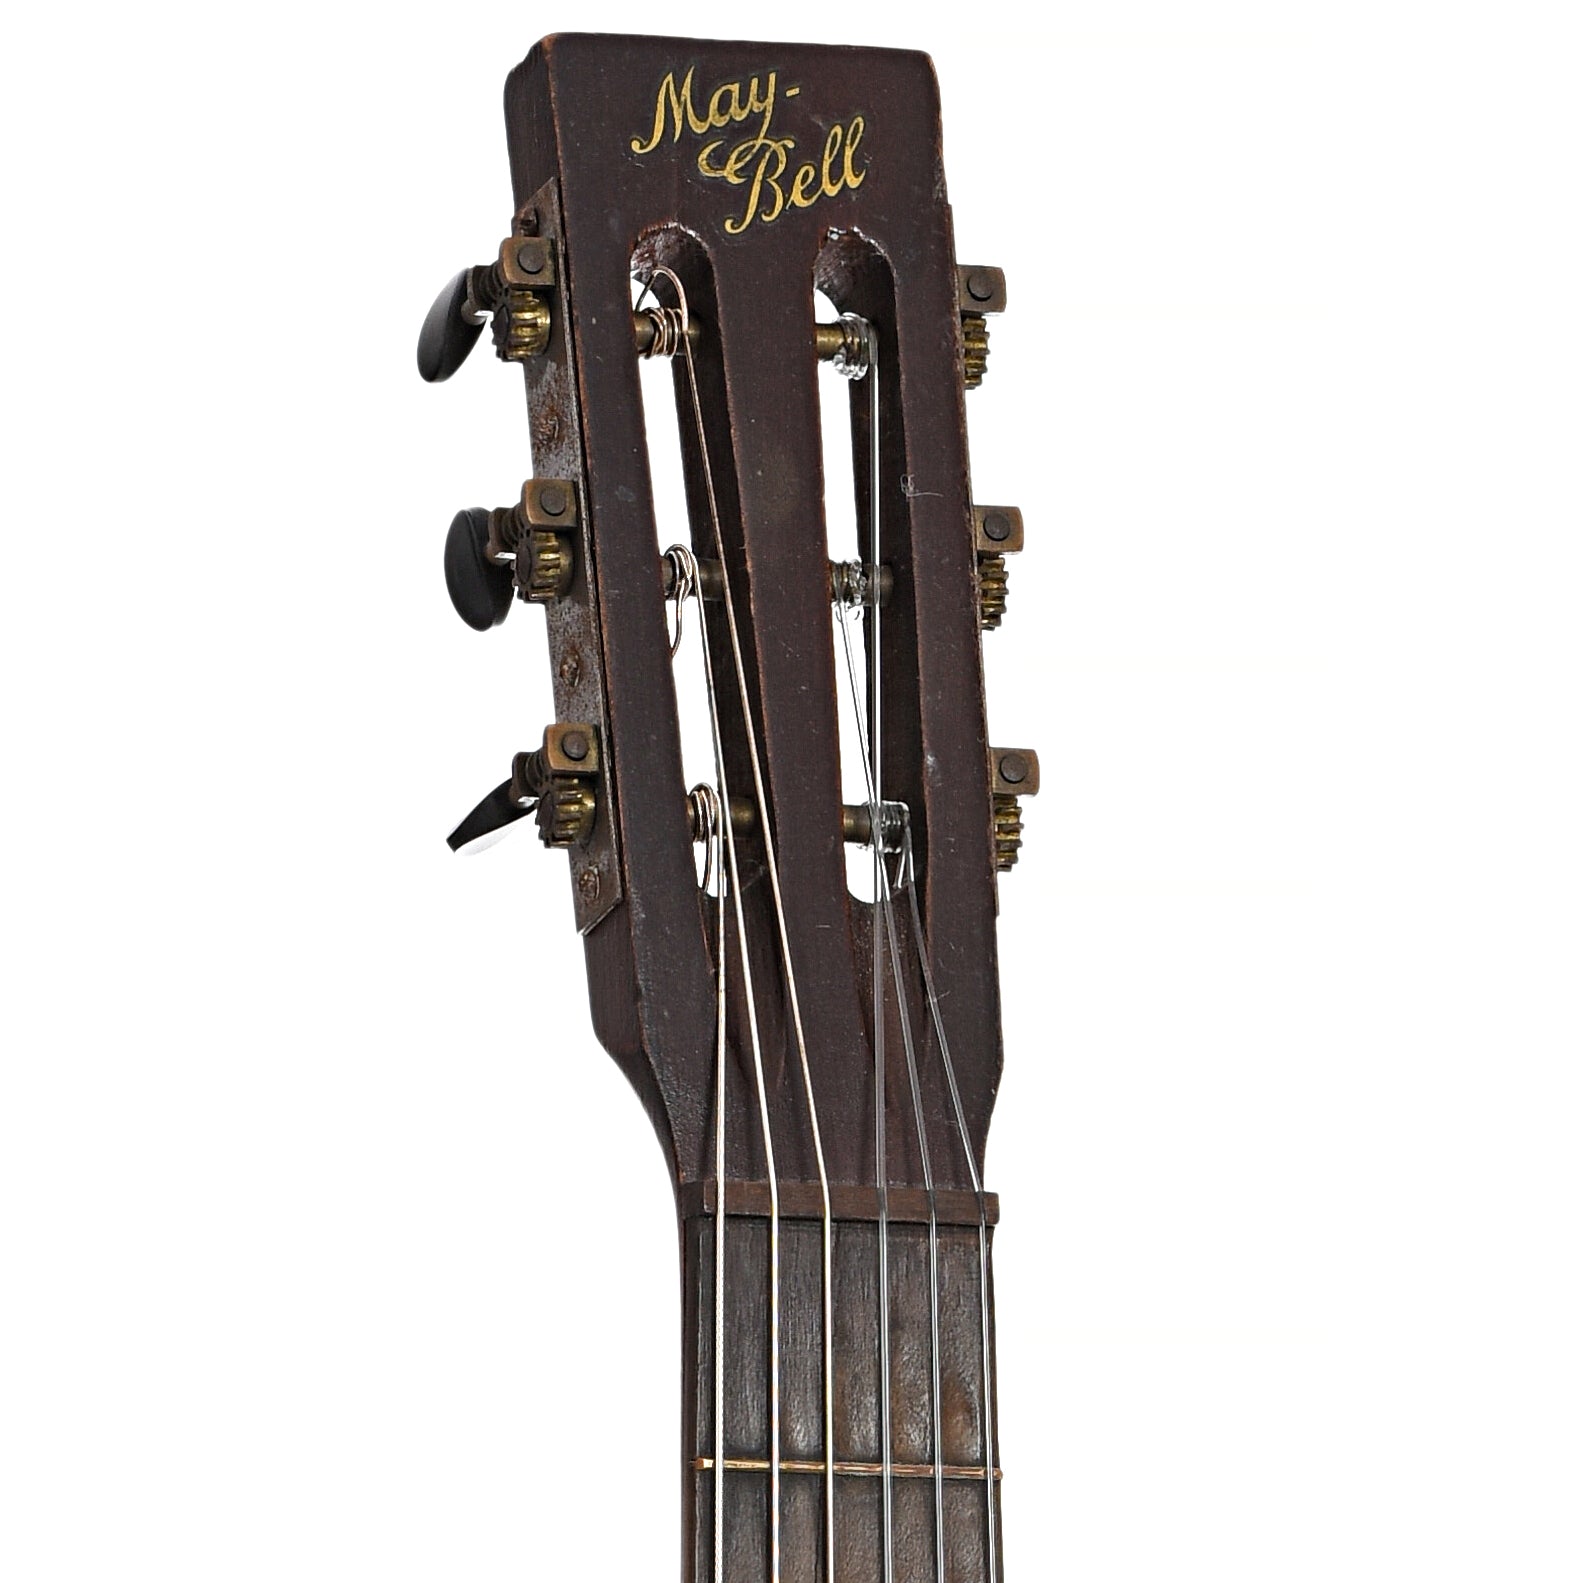 Front headstock of Slingerland May-Bell Style No.5 Parlor Guitar (1930s)